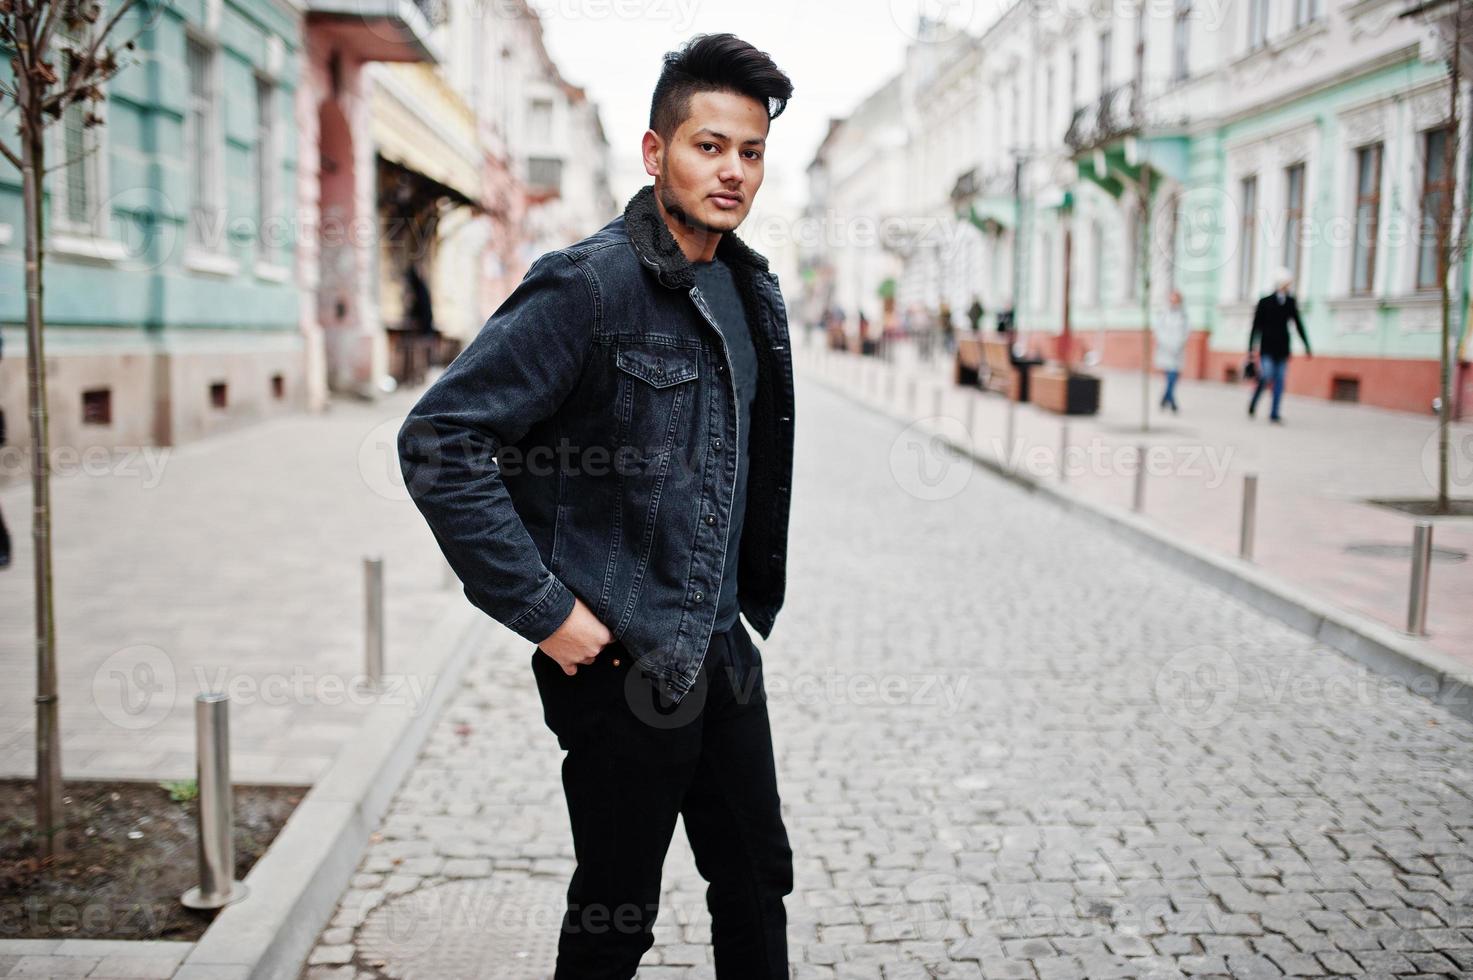 https://static.vecteezy.com/system/resources/previews/010/482/702/non_2x/handsome-and-fashionable-indian-man-in-black-jeans-jacket-posed-outdoor-photo.jpg